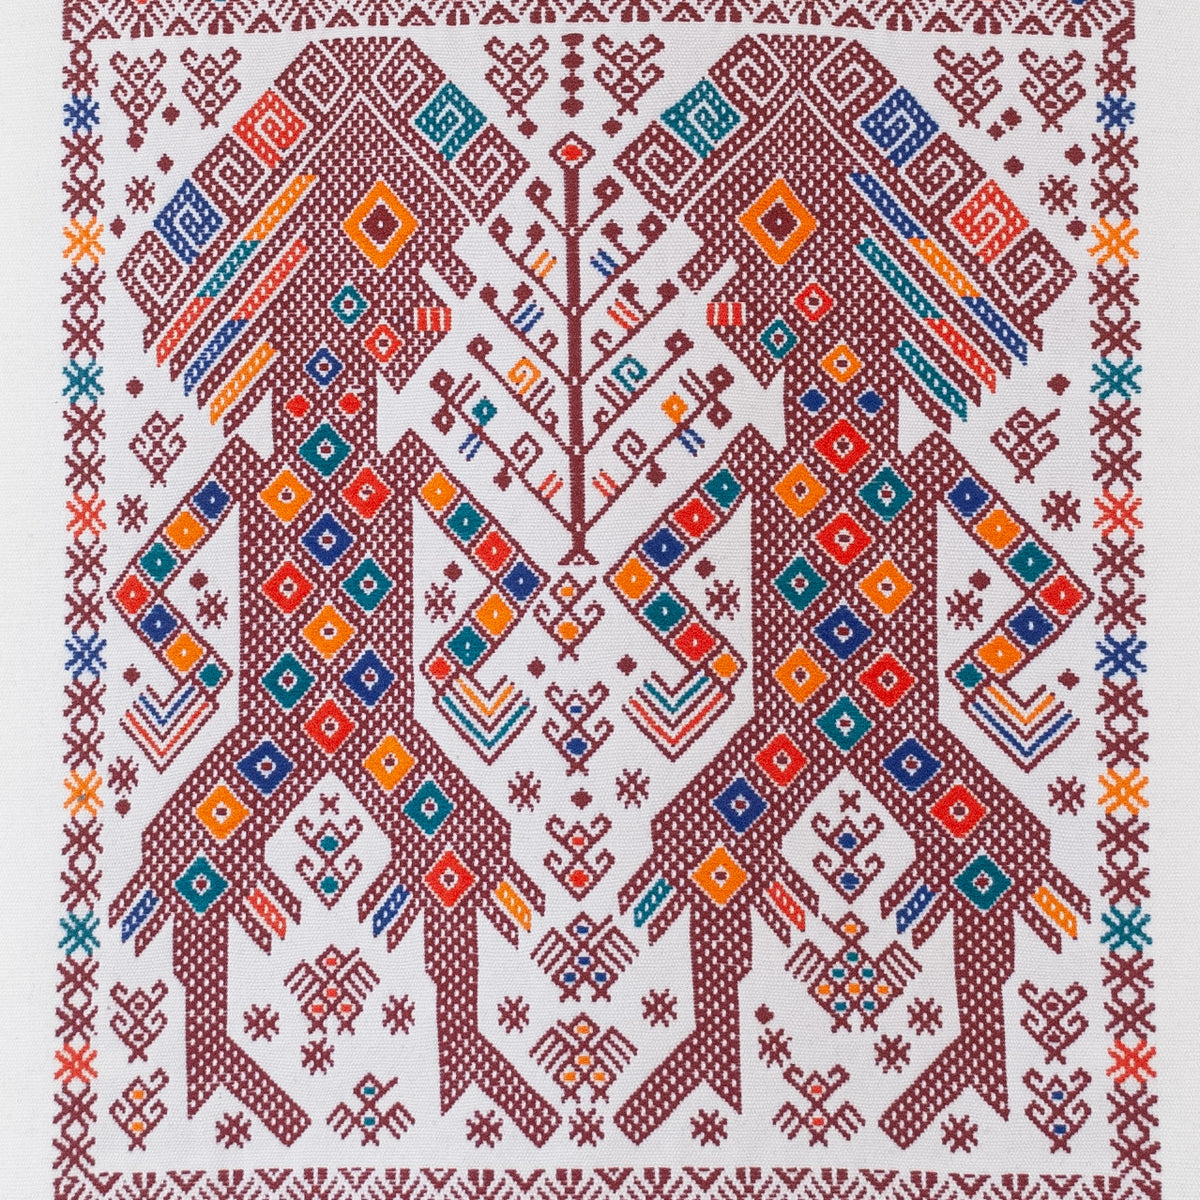 Mayan handwoven brocade design with two figures and tree of life